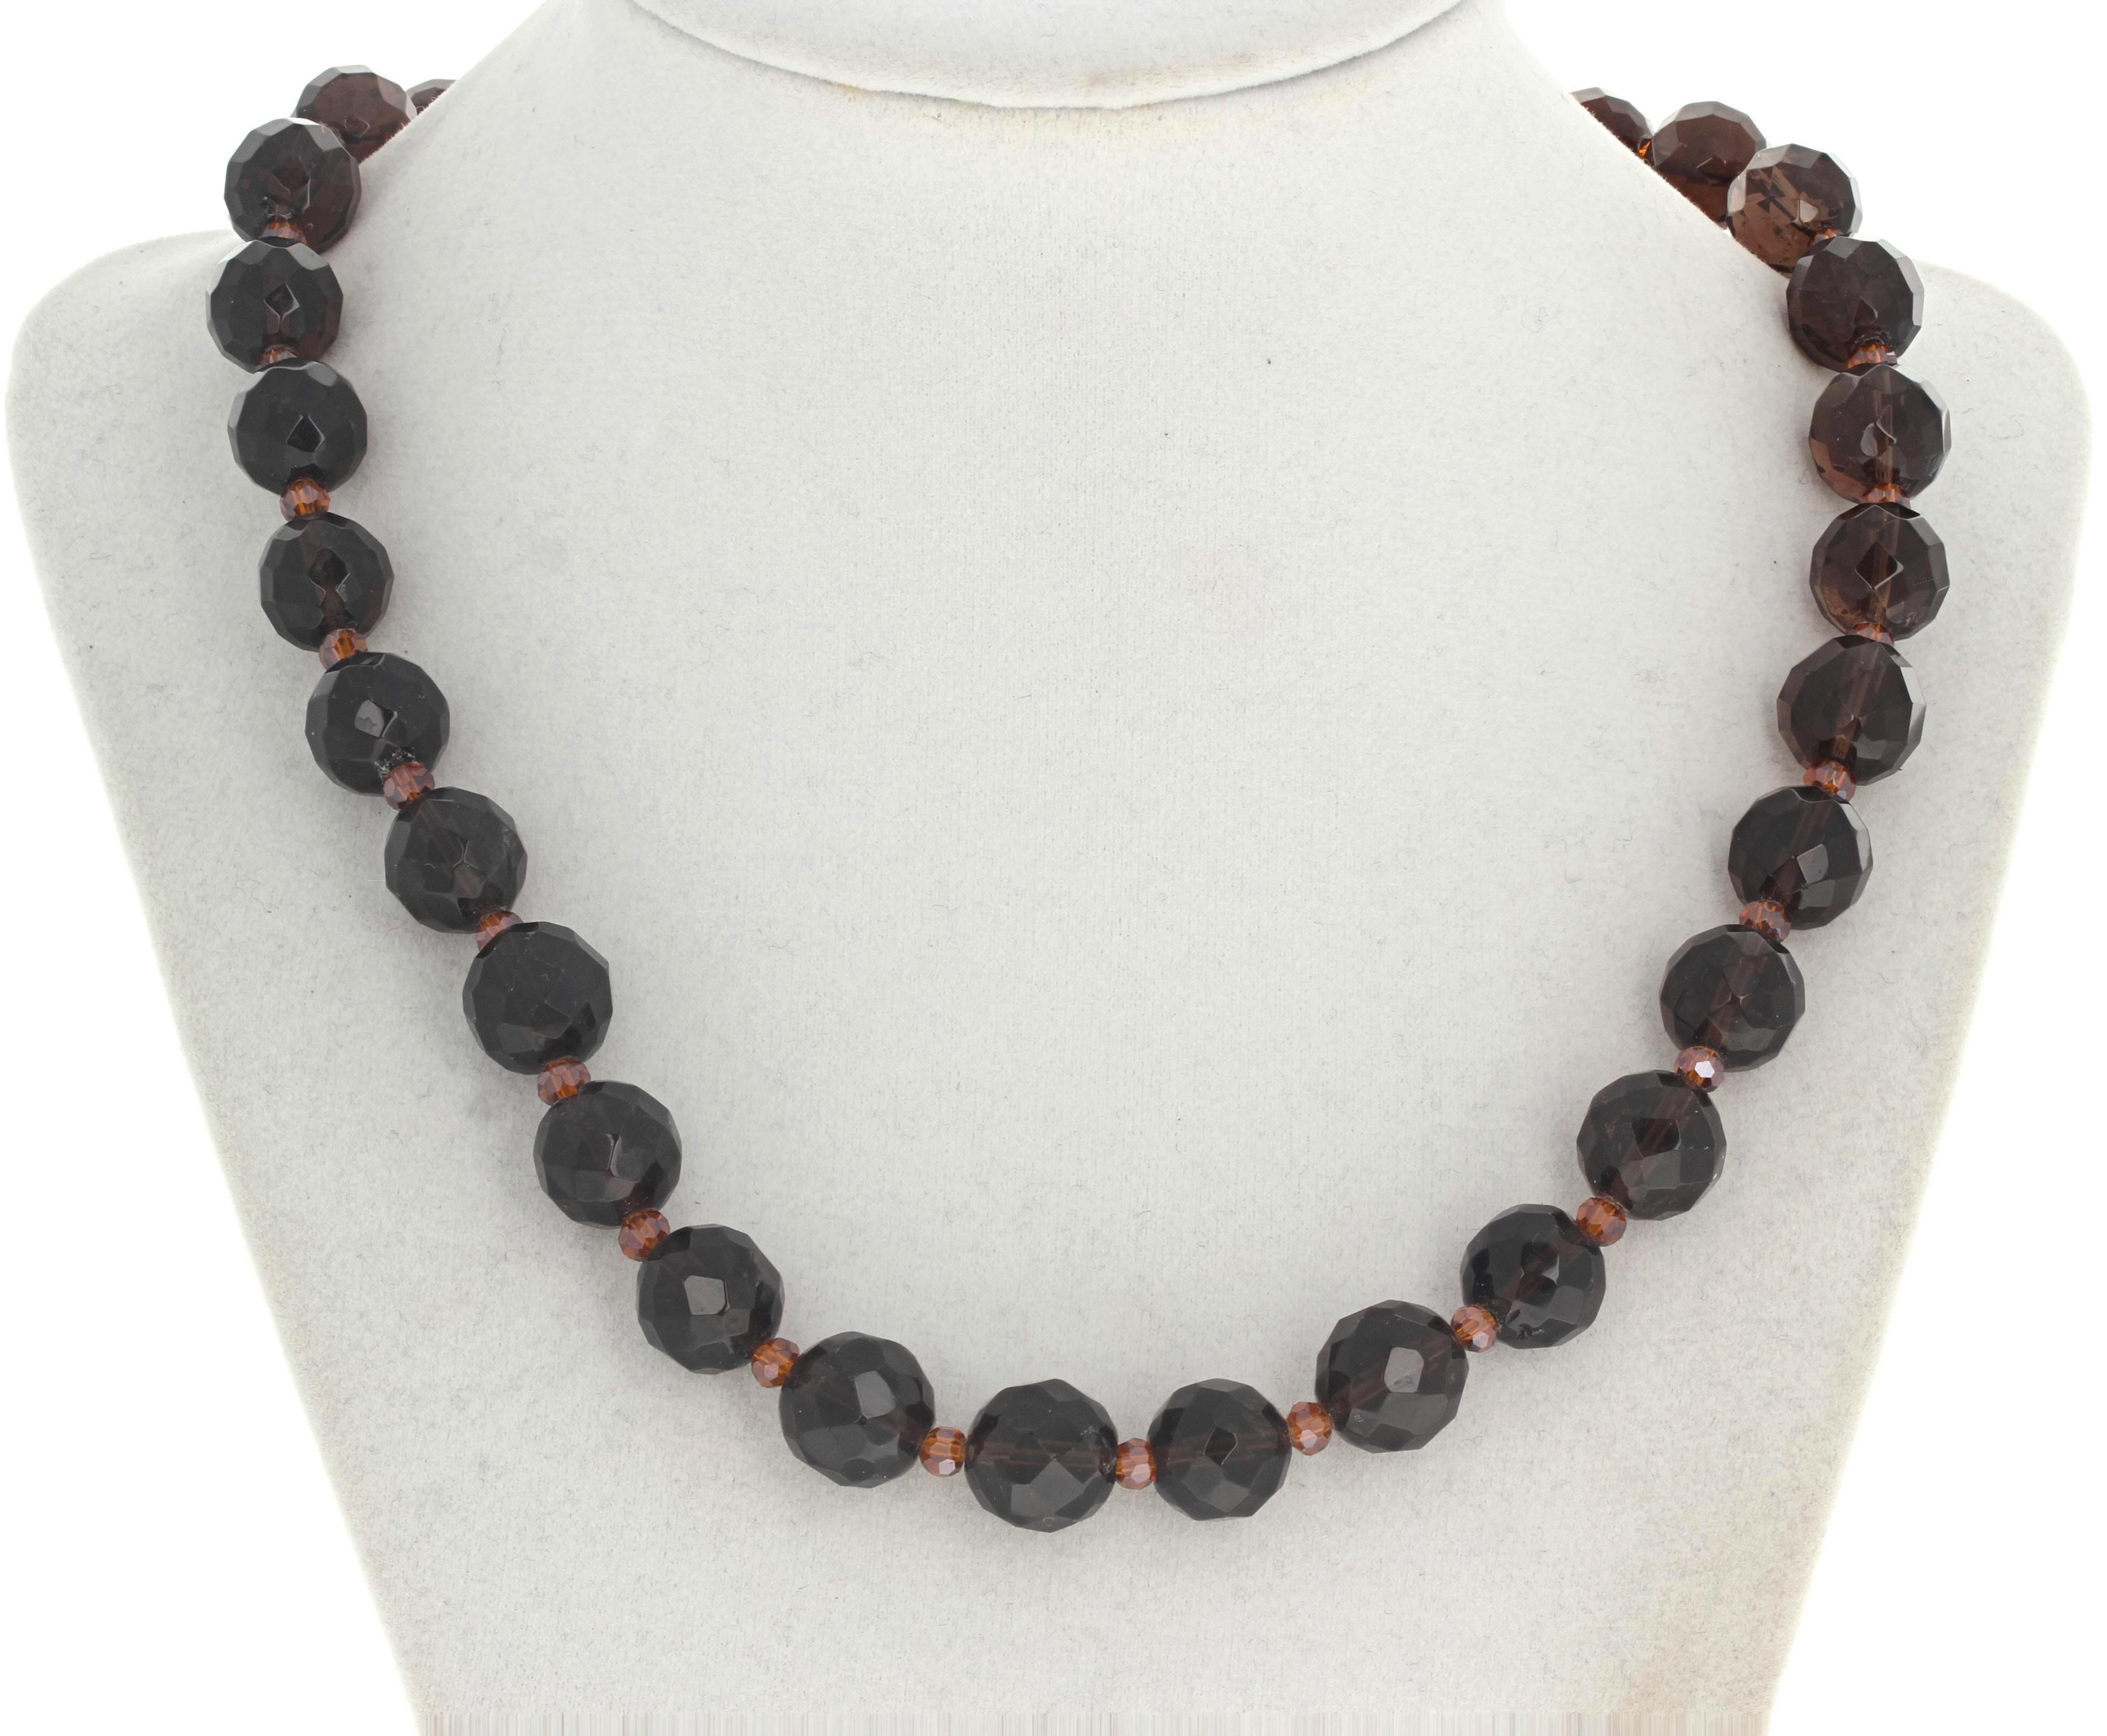 AJD Magnificent Beautiful Very Dark Gemcut Smoky Quartz Necklace In New Condition For Sale In Raleigh, NC